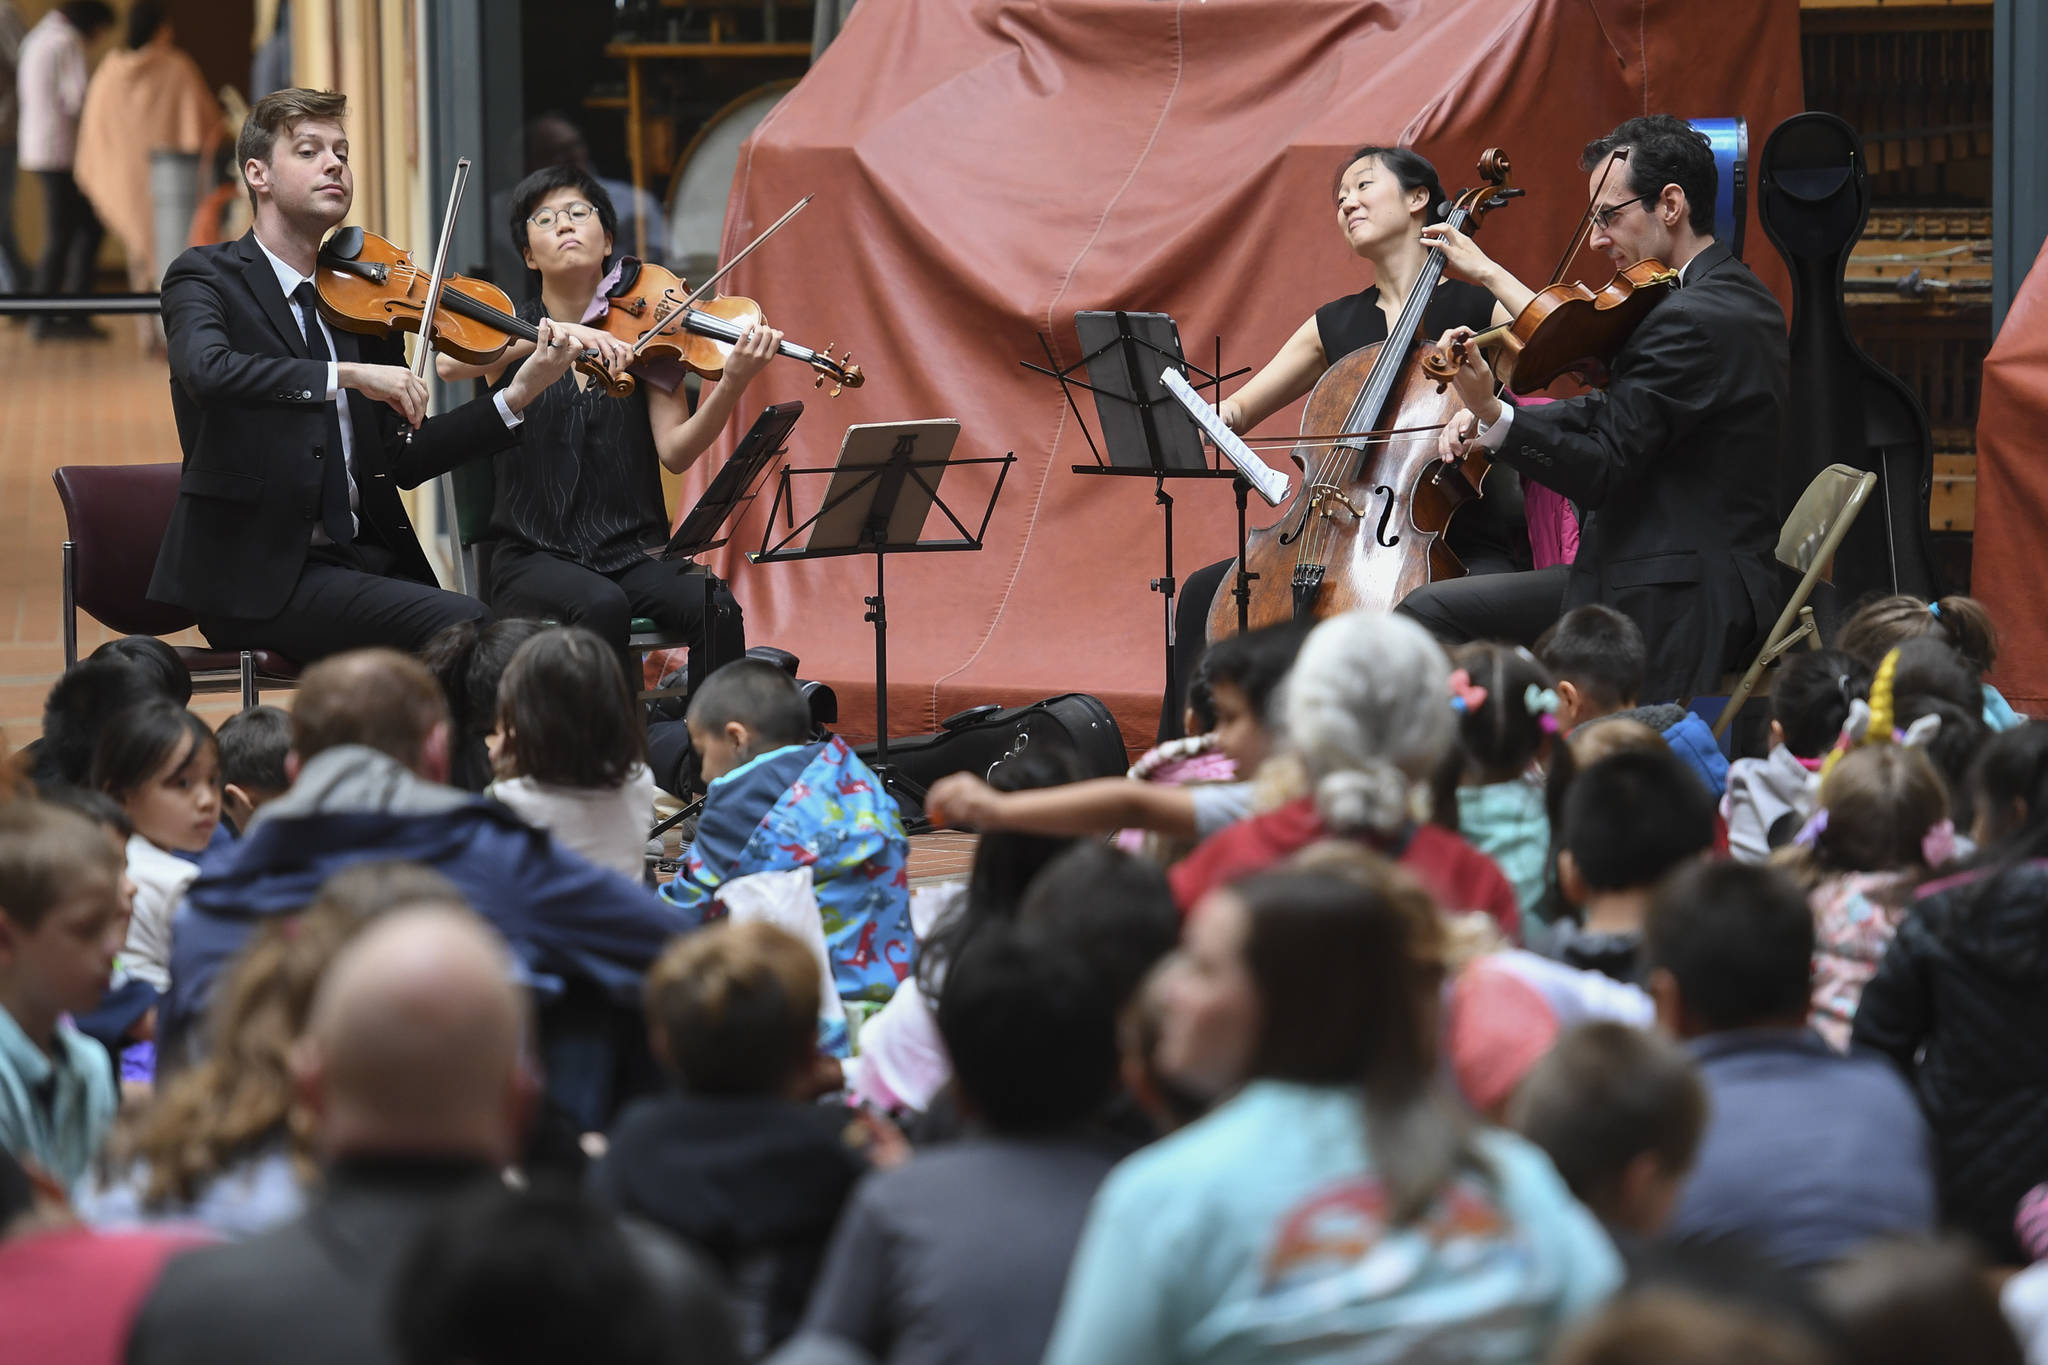 Members of the Argus String Quartet play a Brown Bag Concert at the State Office Building on Wednesday, May 15, 2019. (Michael Penn | Juneau Empire)